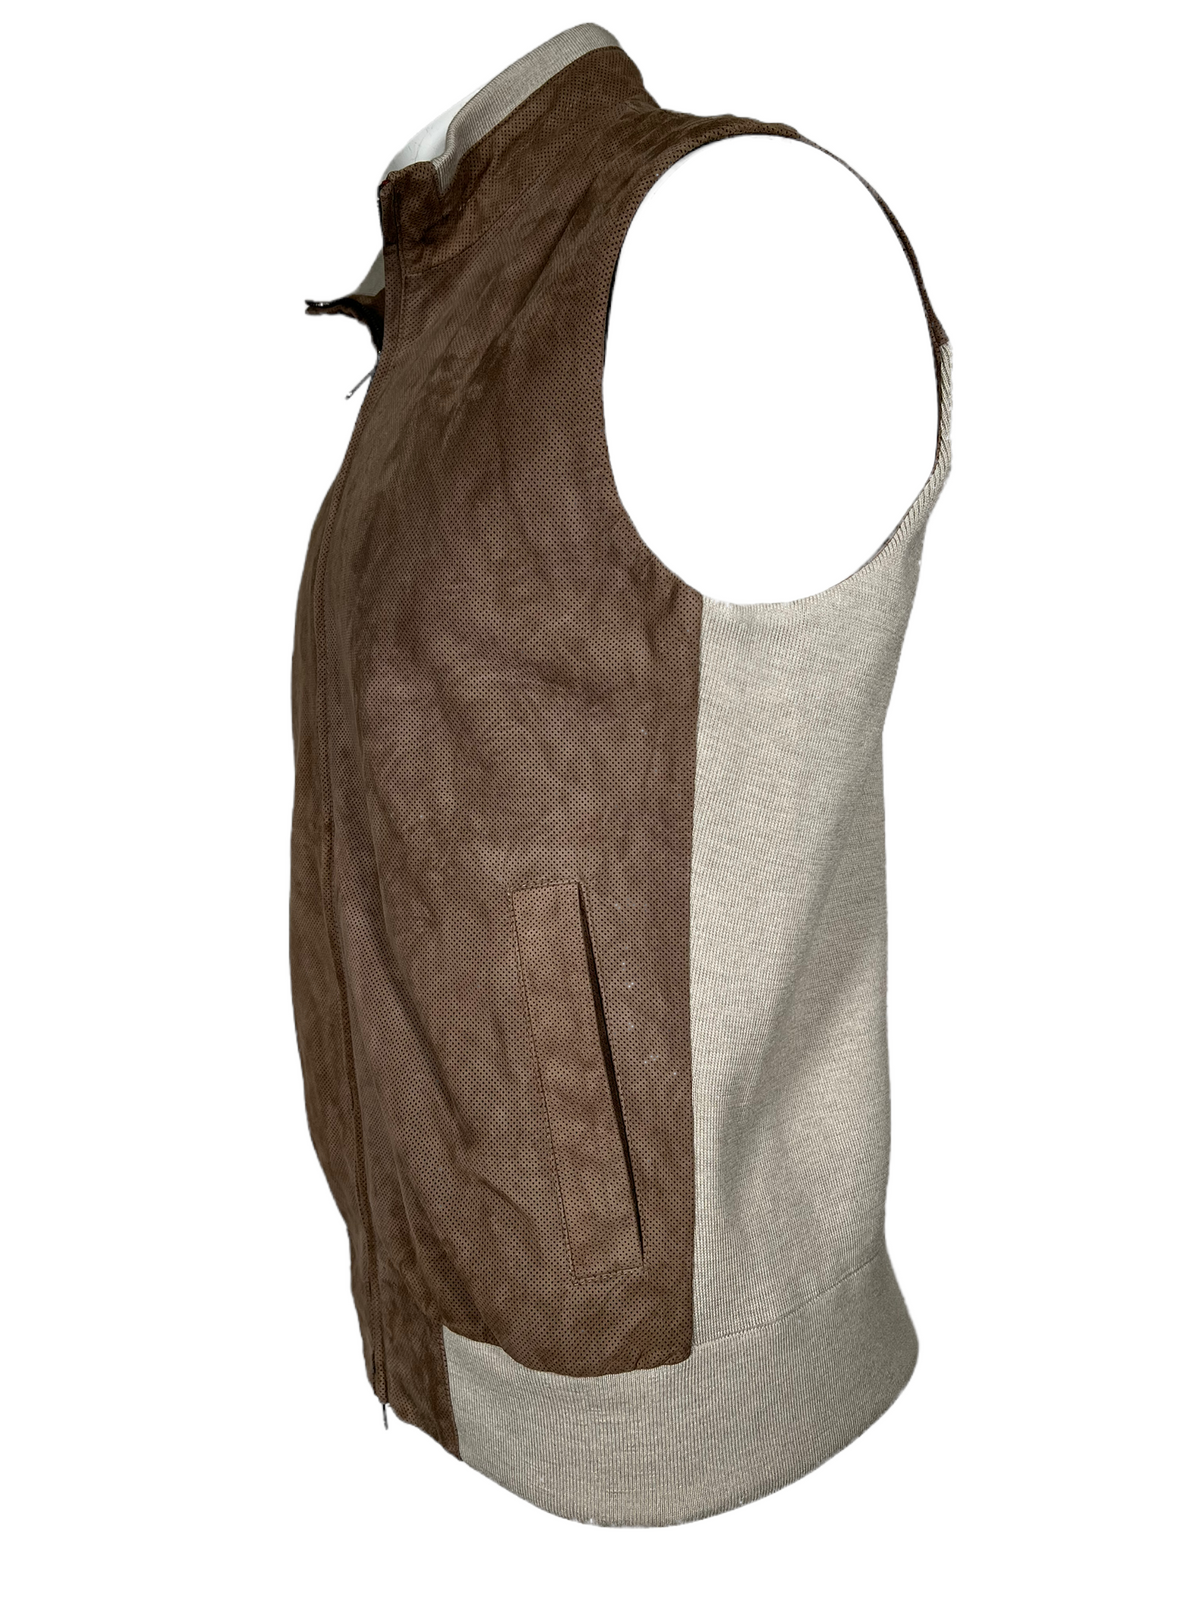 LUCIANO BARBERA PERFORATED SUEDE VEST - TAN